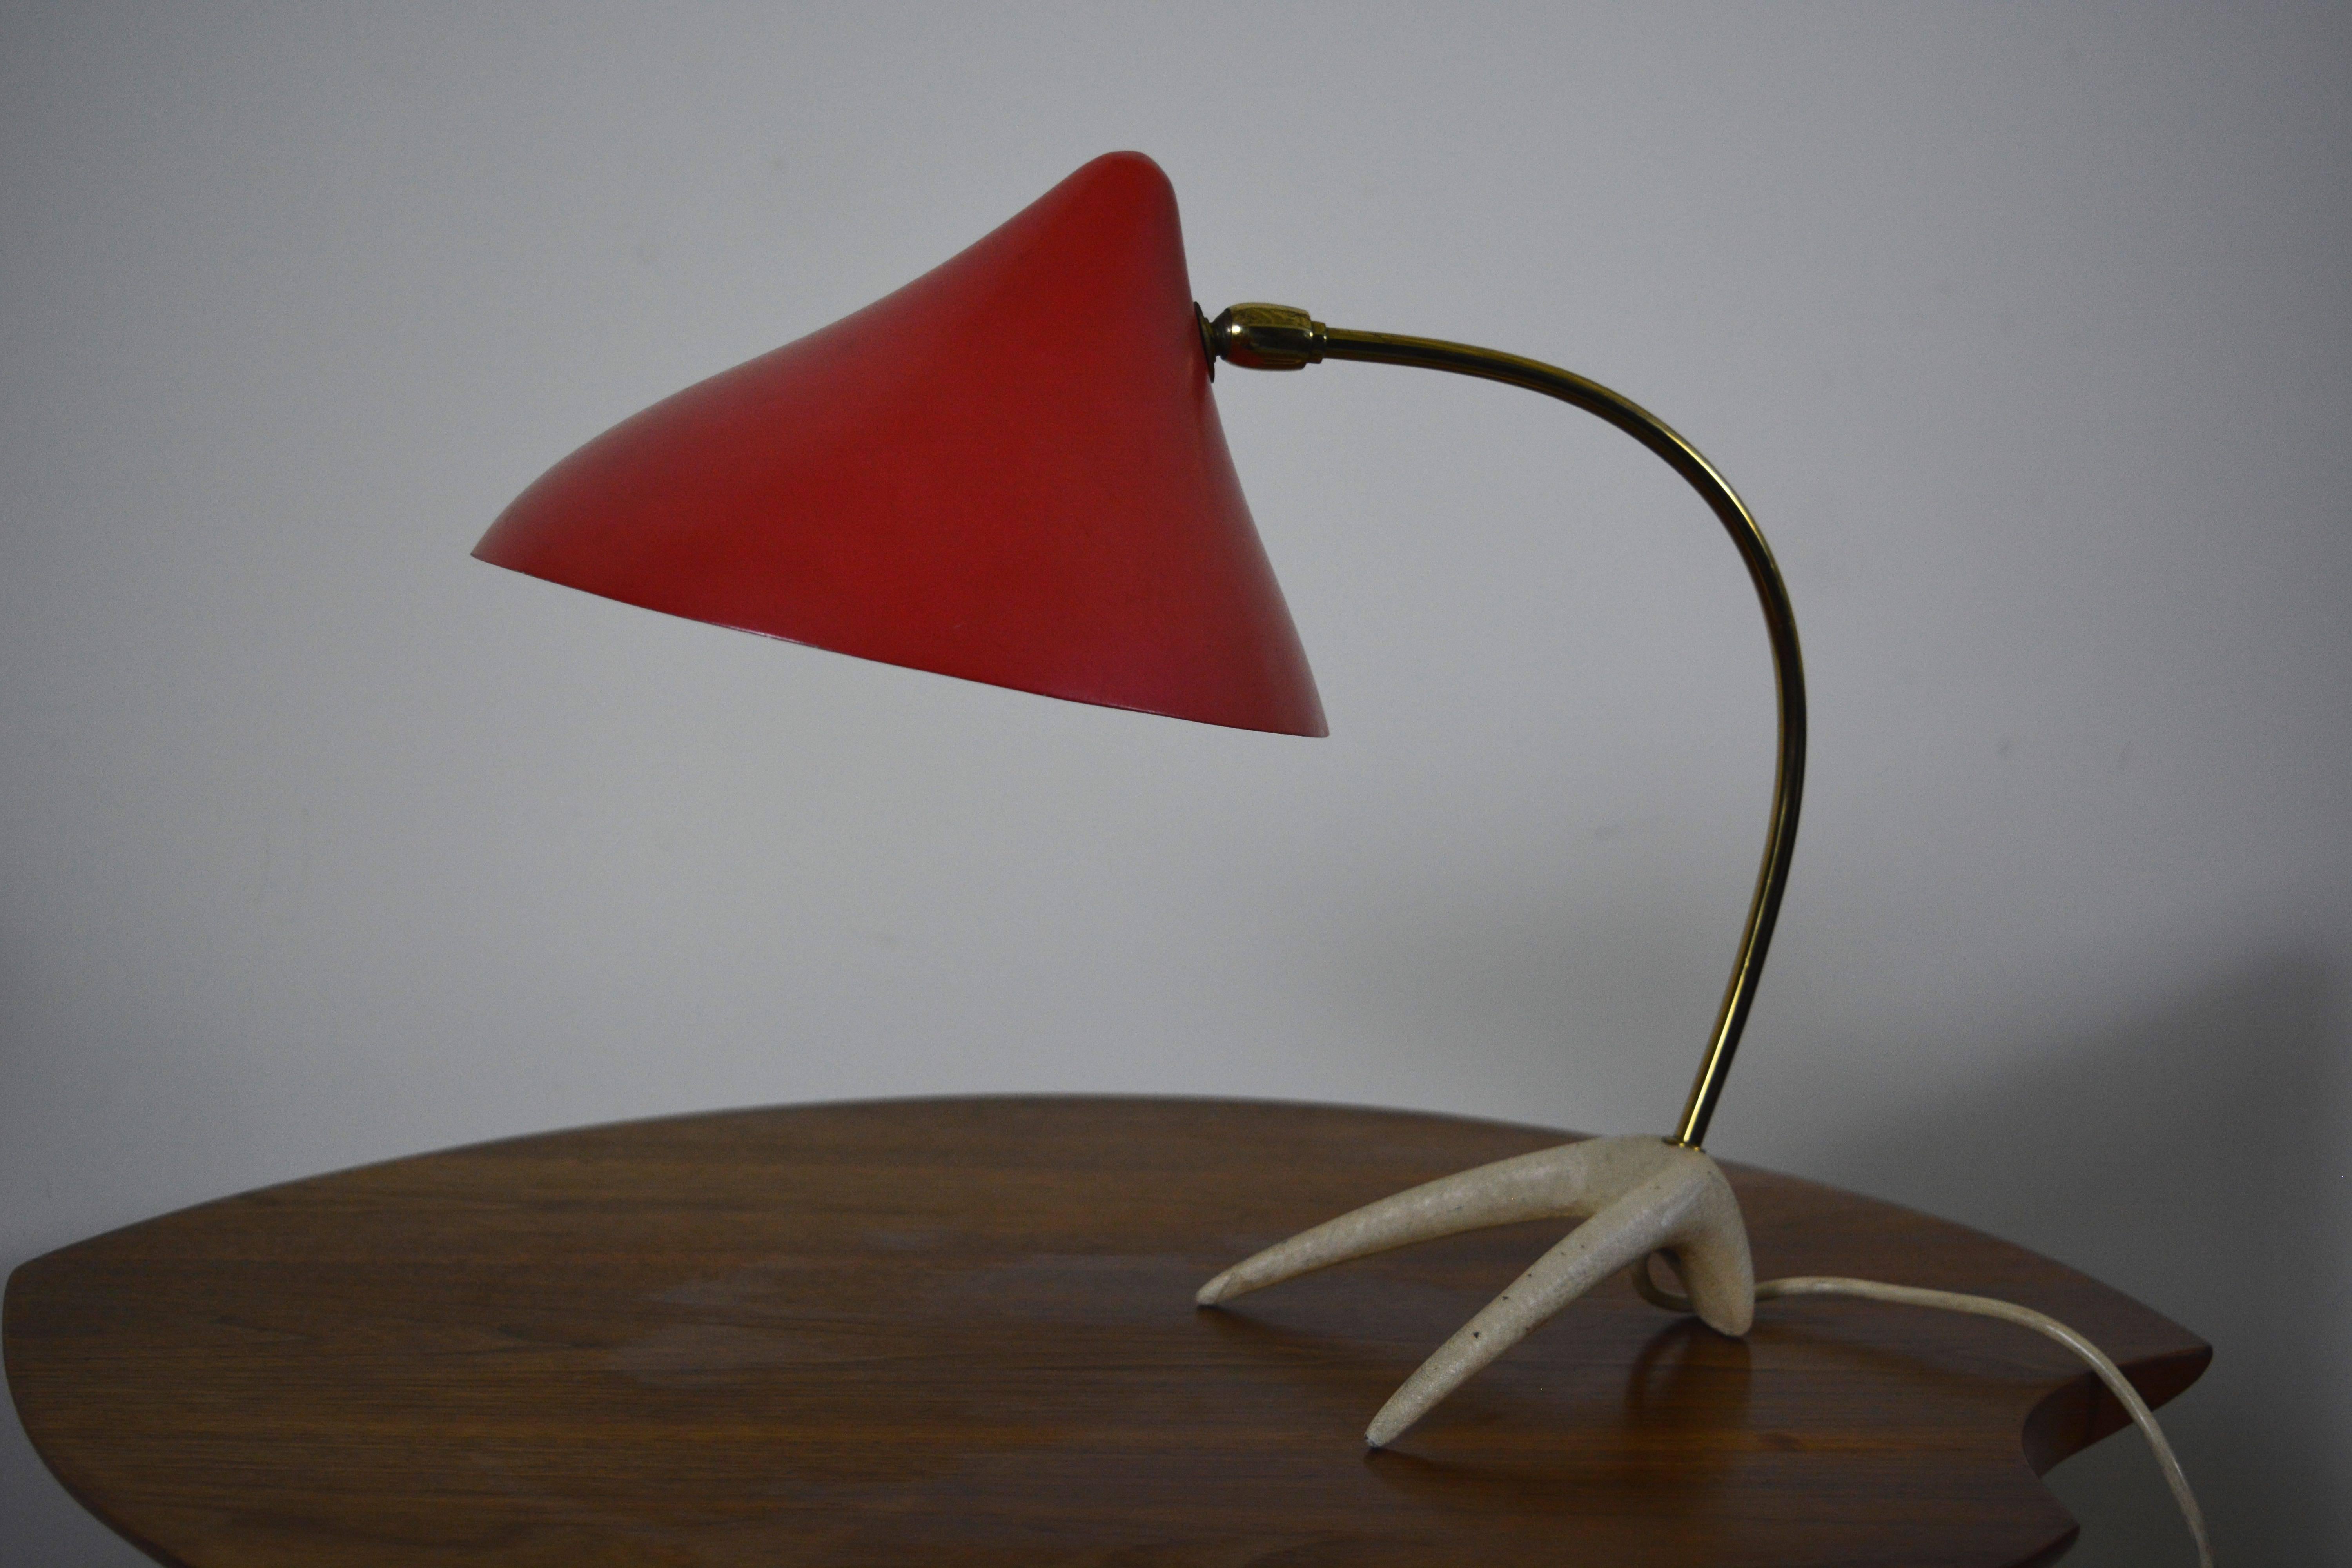 Modernist desk lamp by Louis Kalff in very nice original condition. Patina to brass consistent as shown in pictures. In addition, the aluminum shade still retains its original finish in excellent original condition.